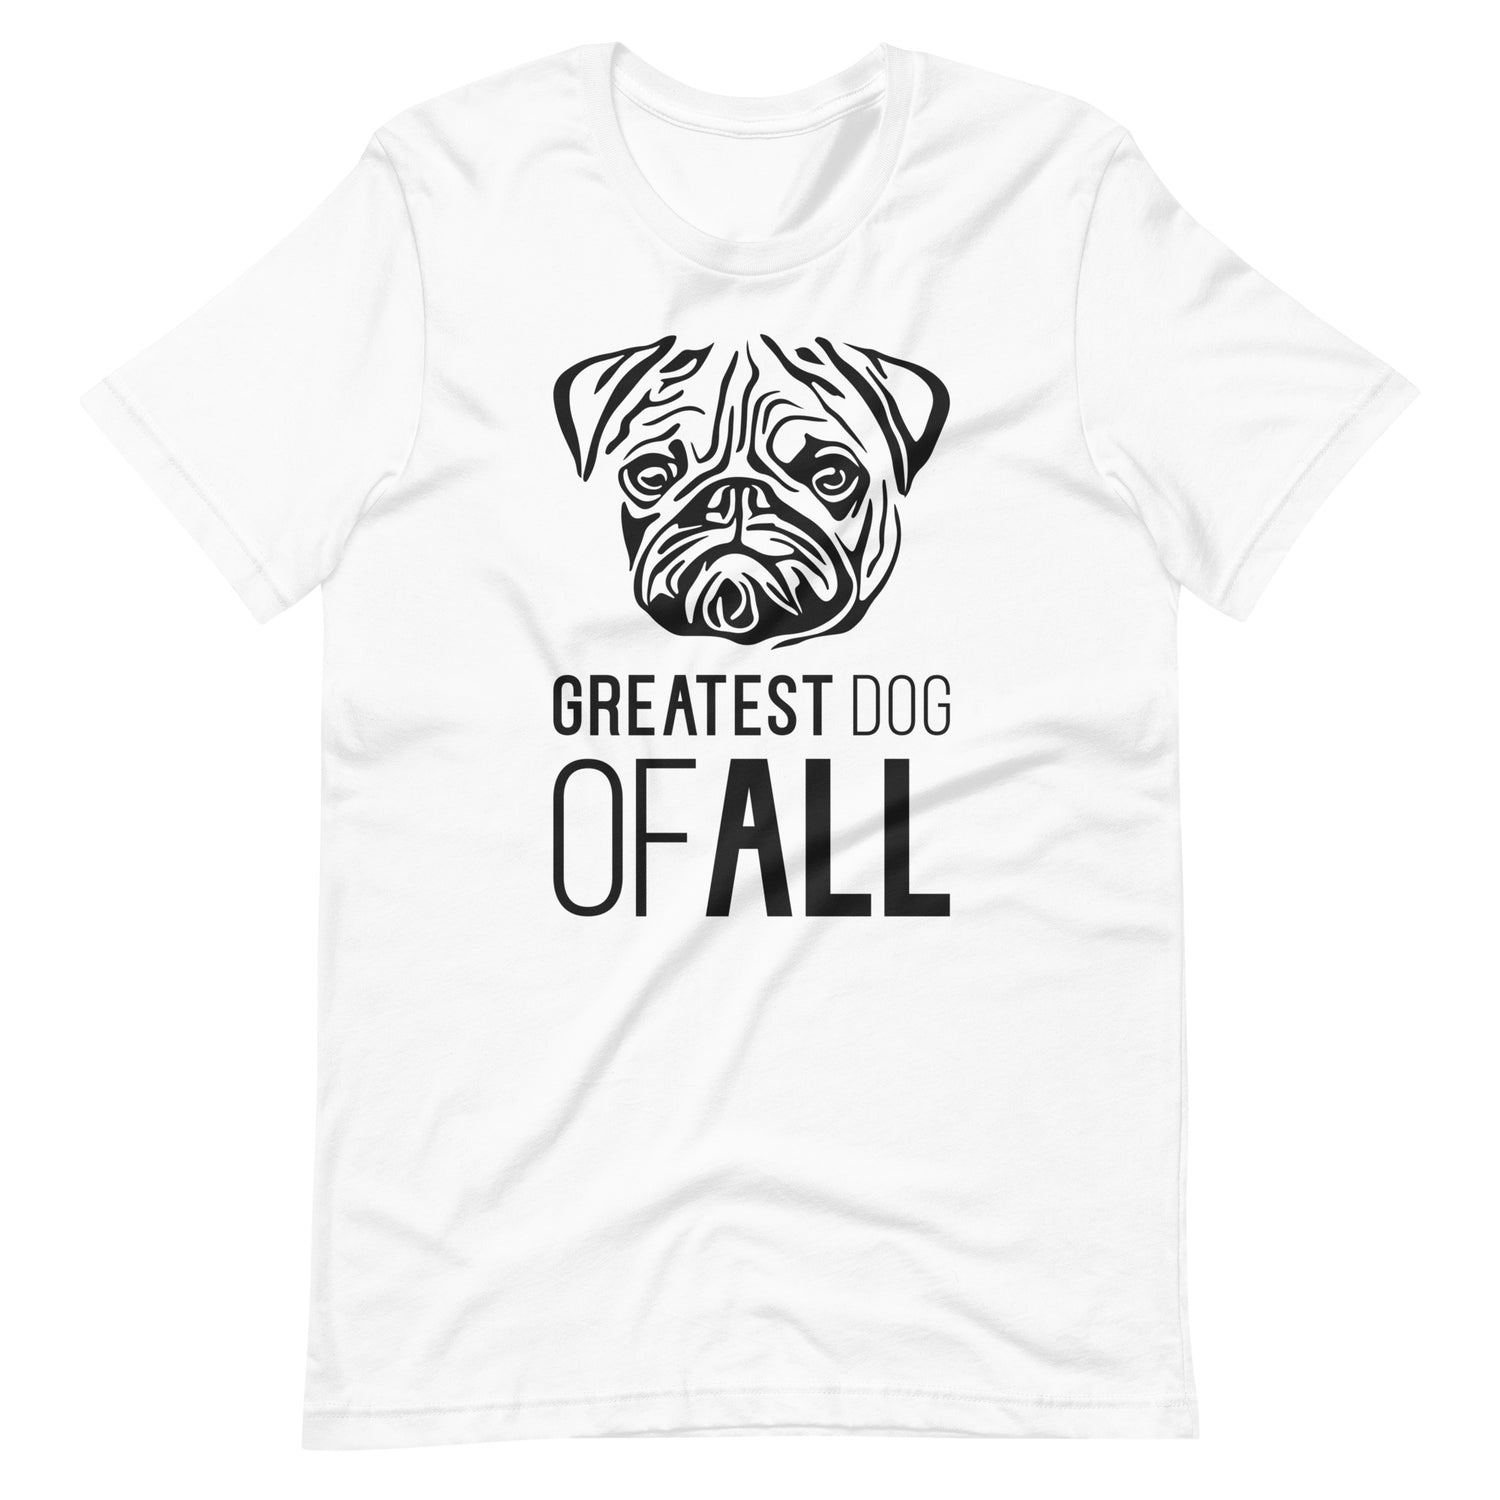 Black Pug face silhouette with Greatest Dog of All caption on unisex white t-shirt